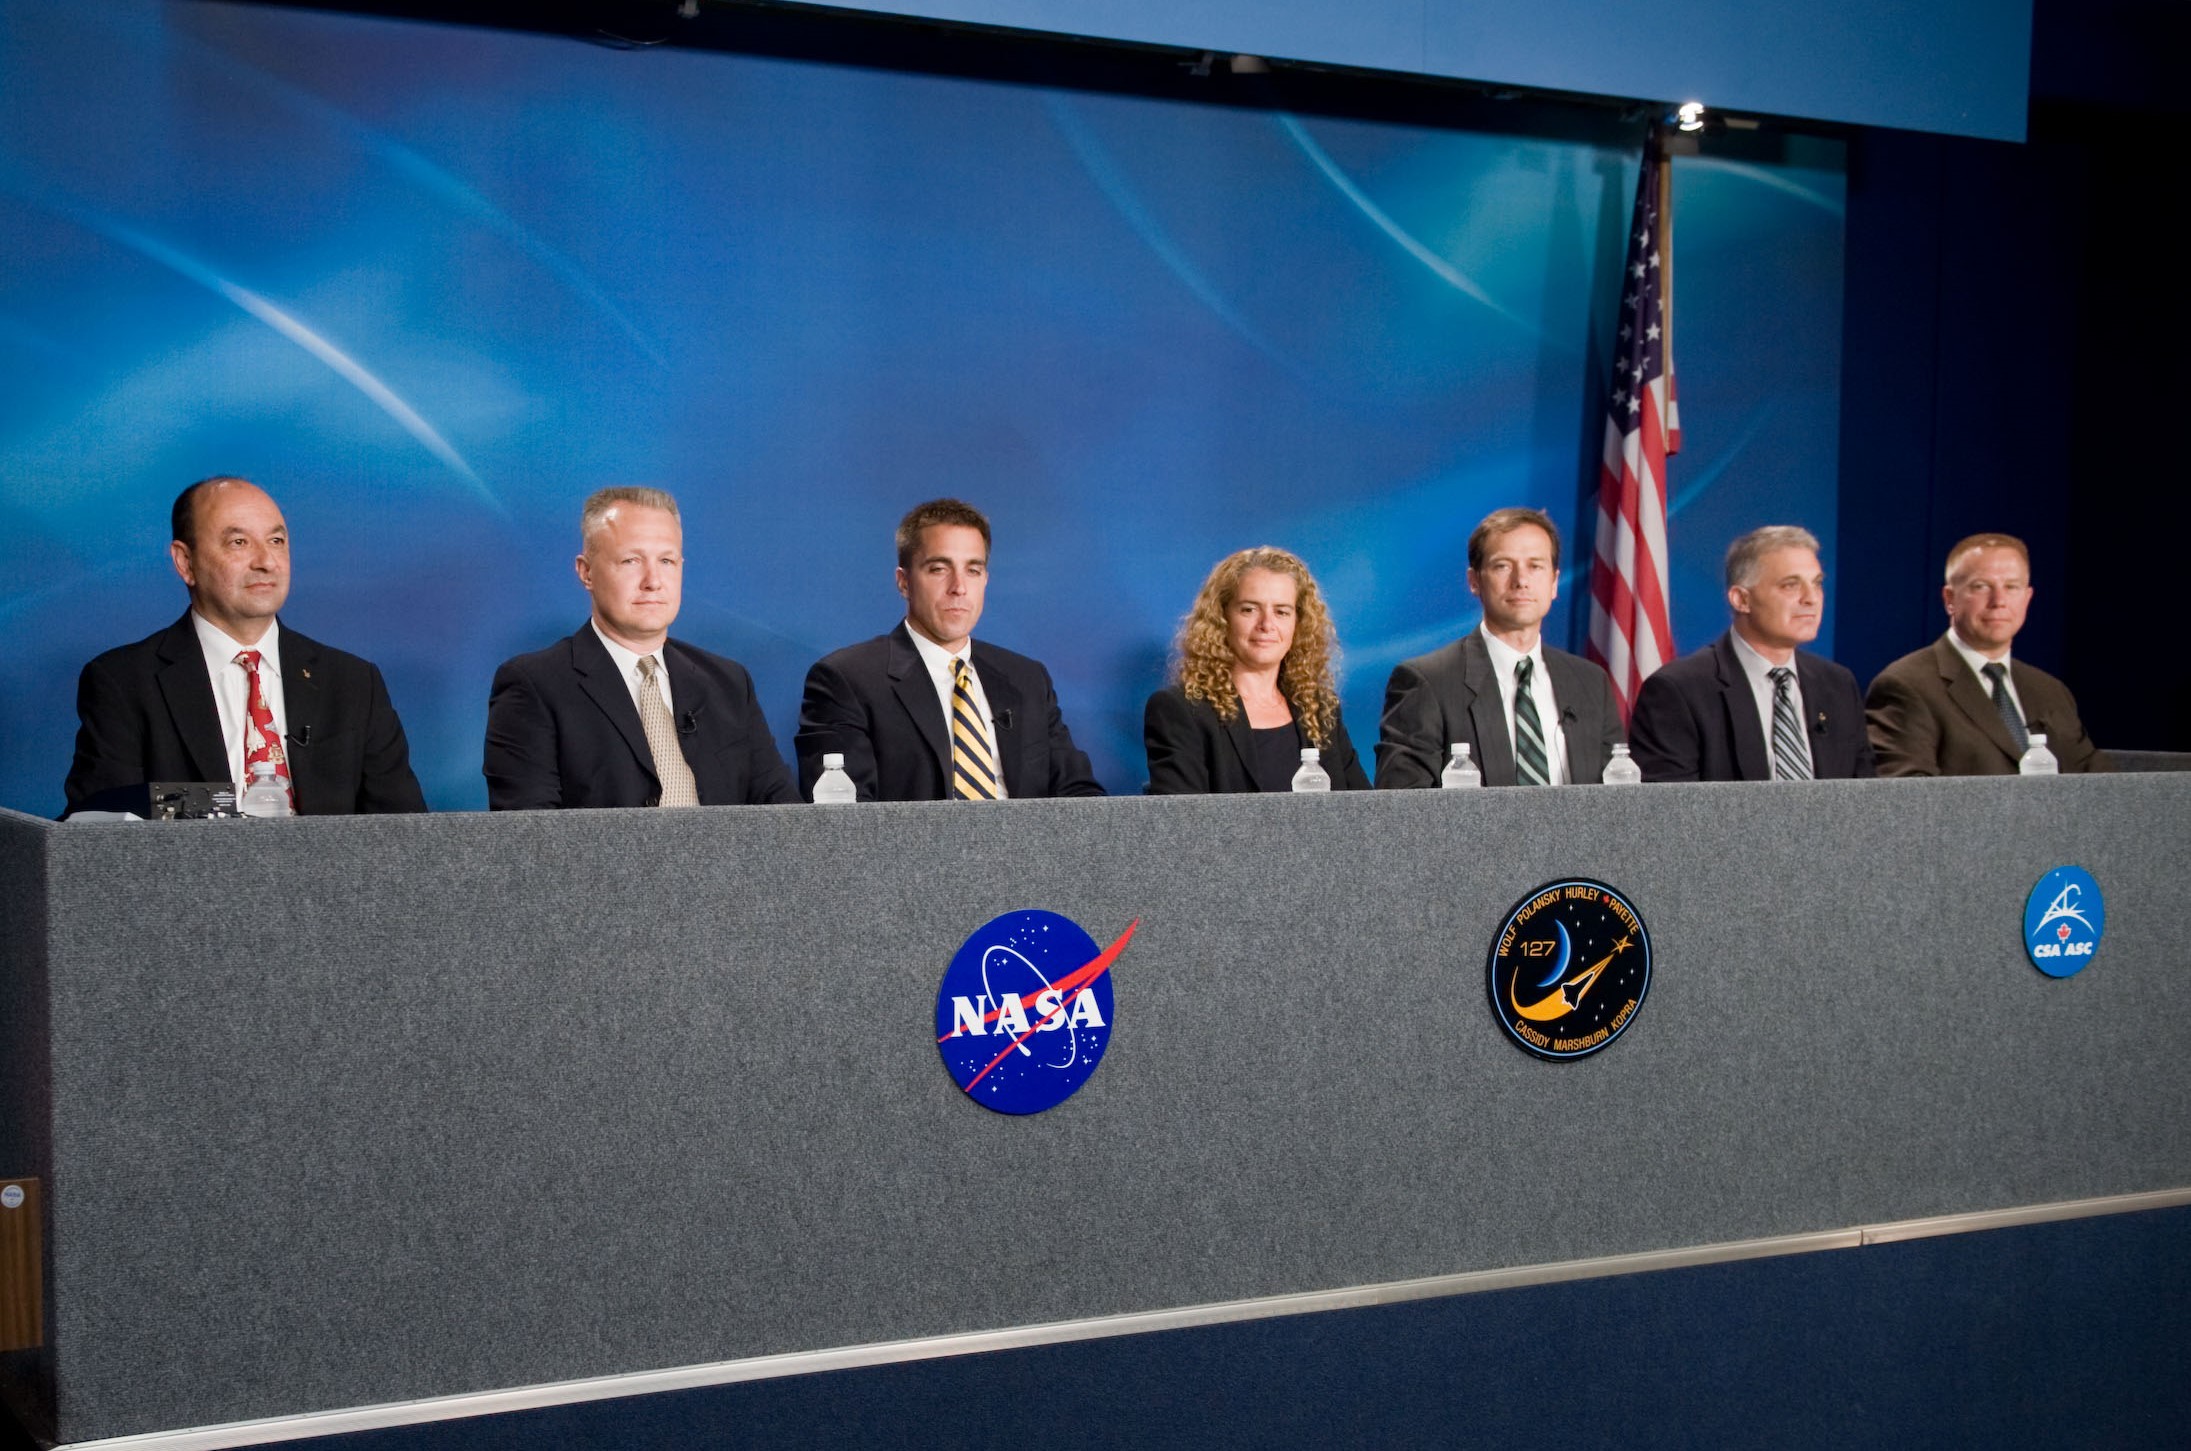 The STS-127 crew during their preflight press conference at NASA's Johnson Space Center in Houston